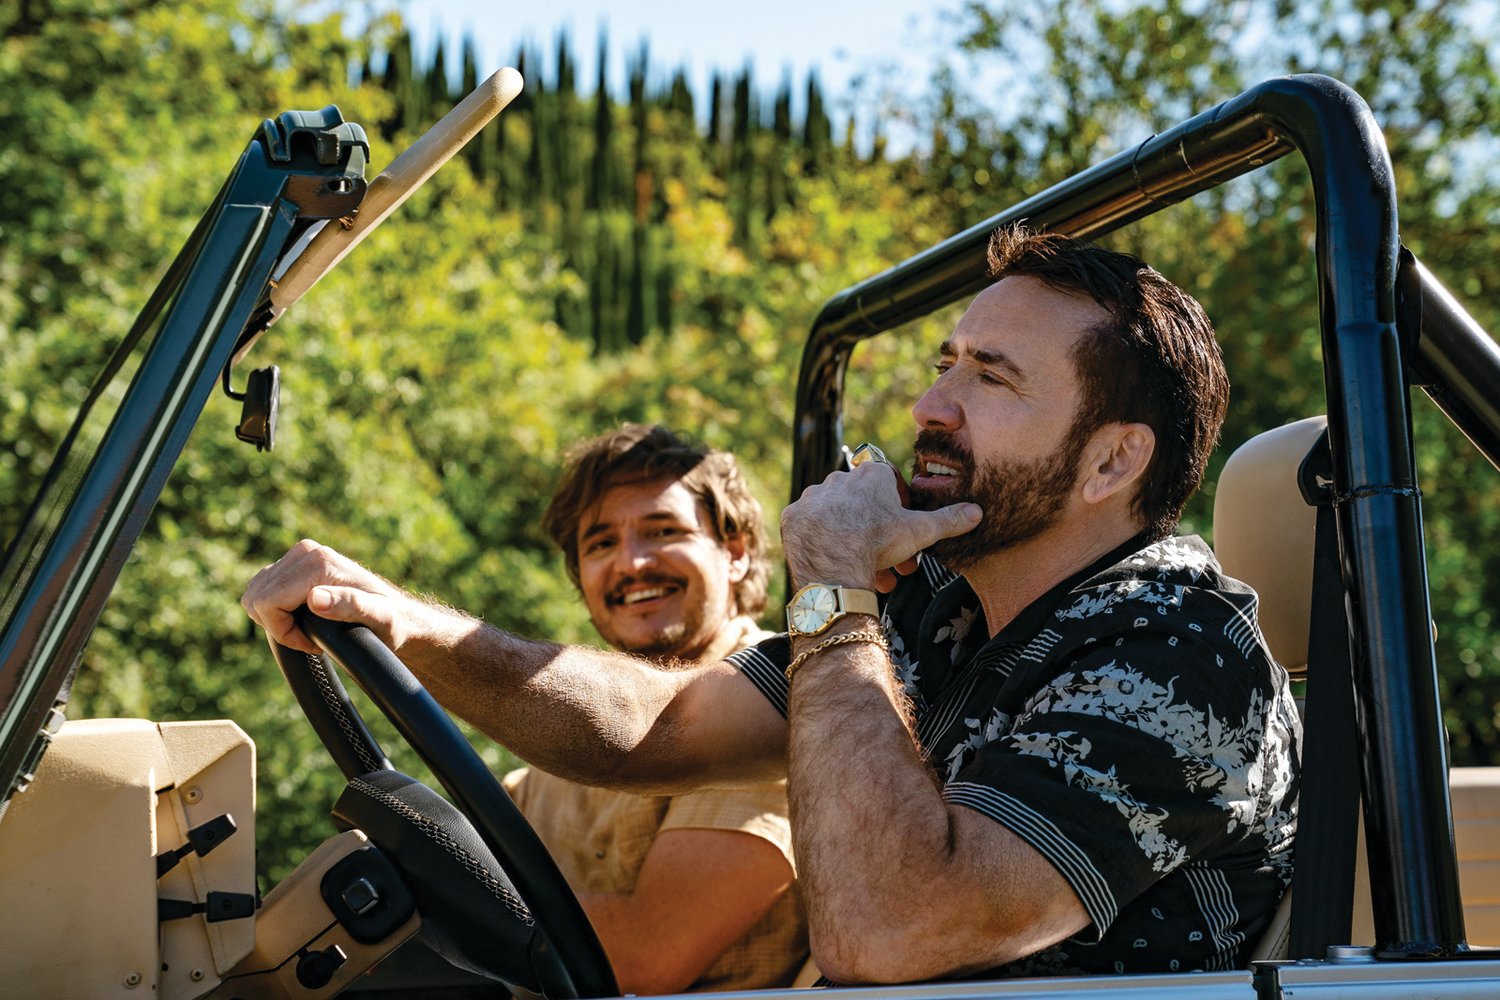 Pedro Pascal stars with Nicolas Cage in The Unbearable Weight of Massive Talent in theaters now.